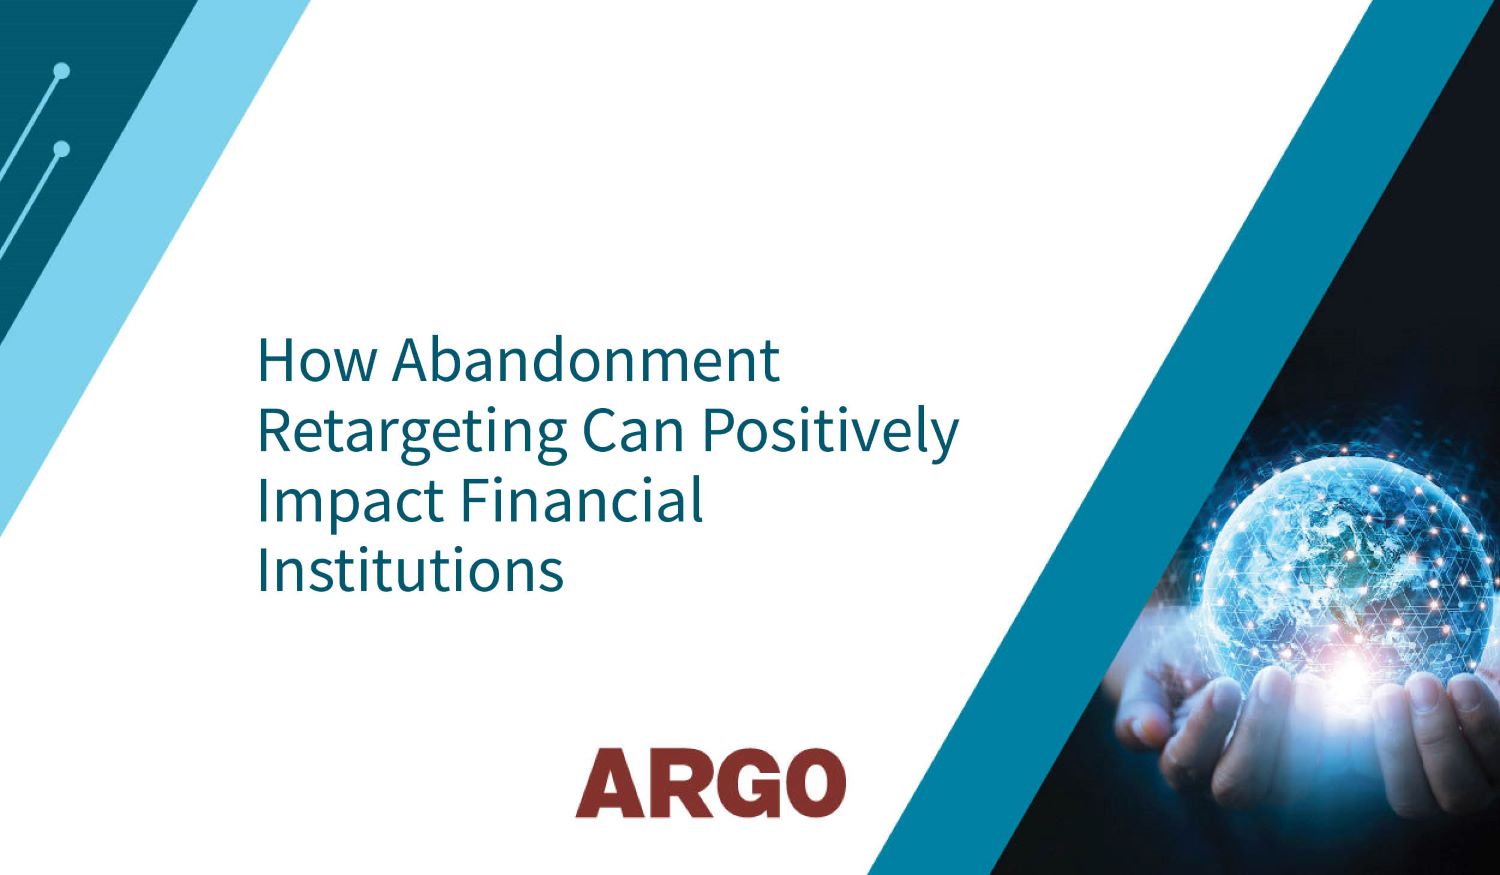 How Abandonment Retargeting Can Positively Impact Financial Institutions 